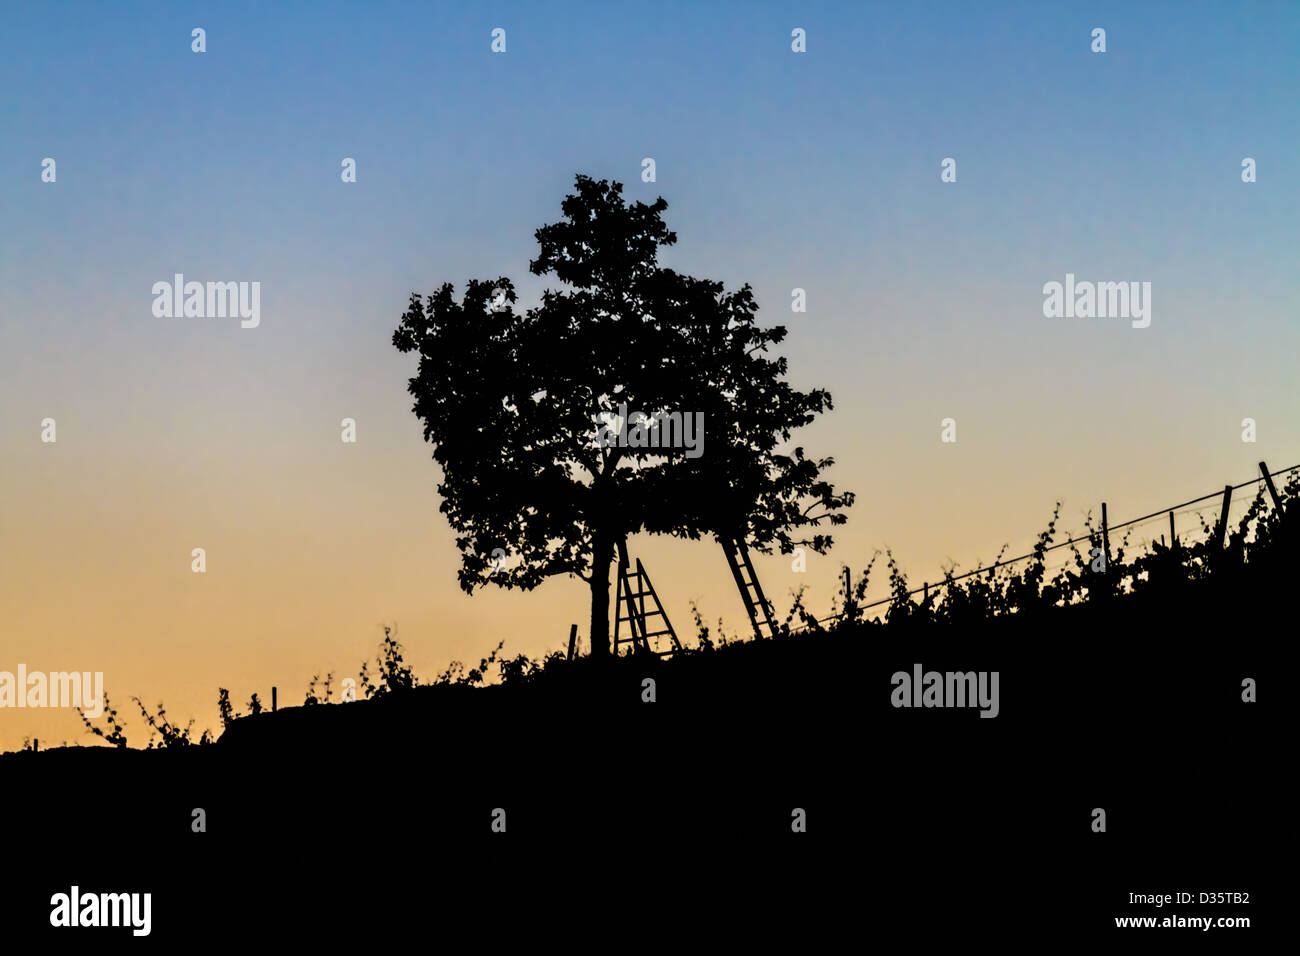 Beautiful landscape image with tree silhouette at sunset Stock Photo